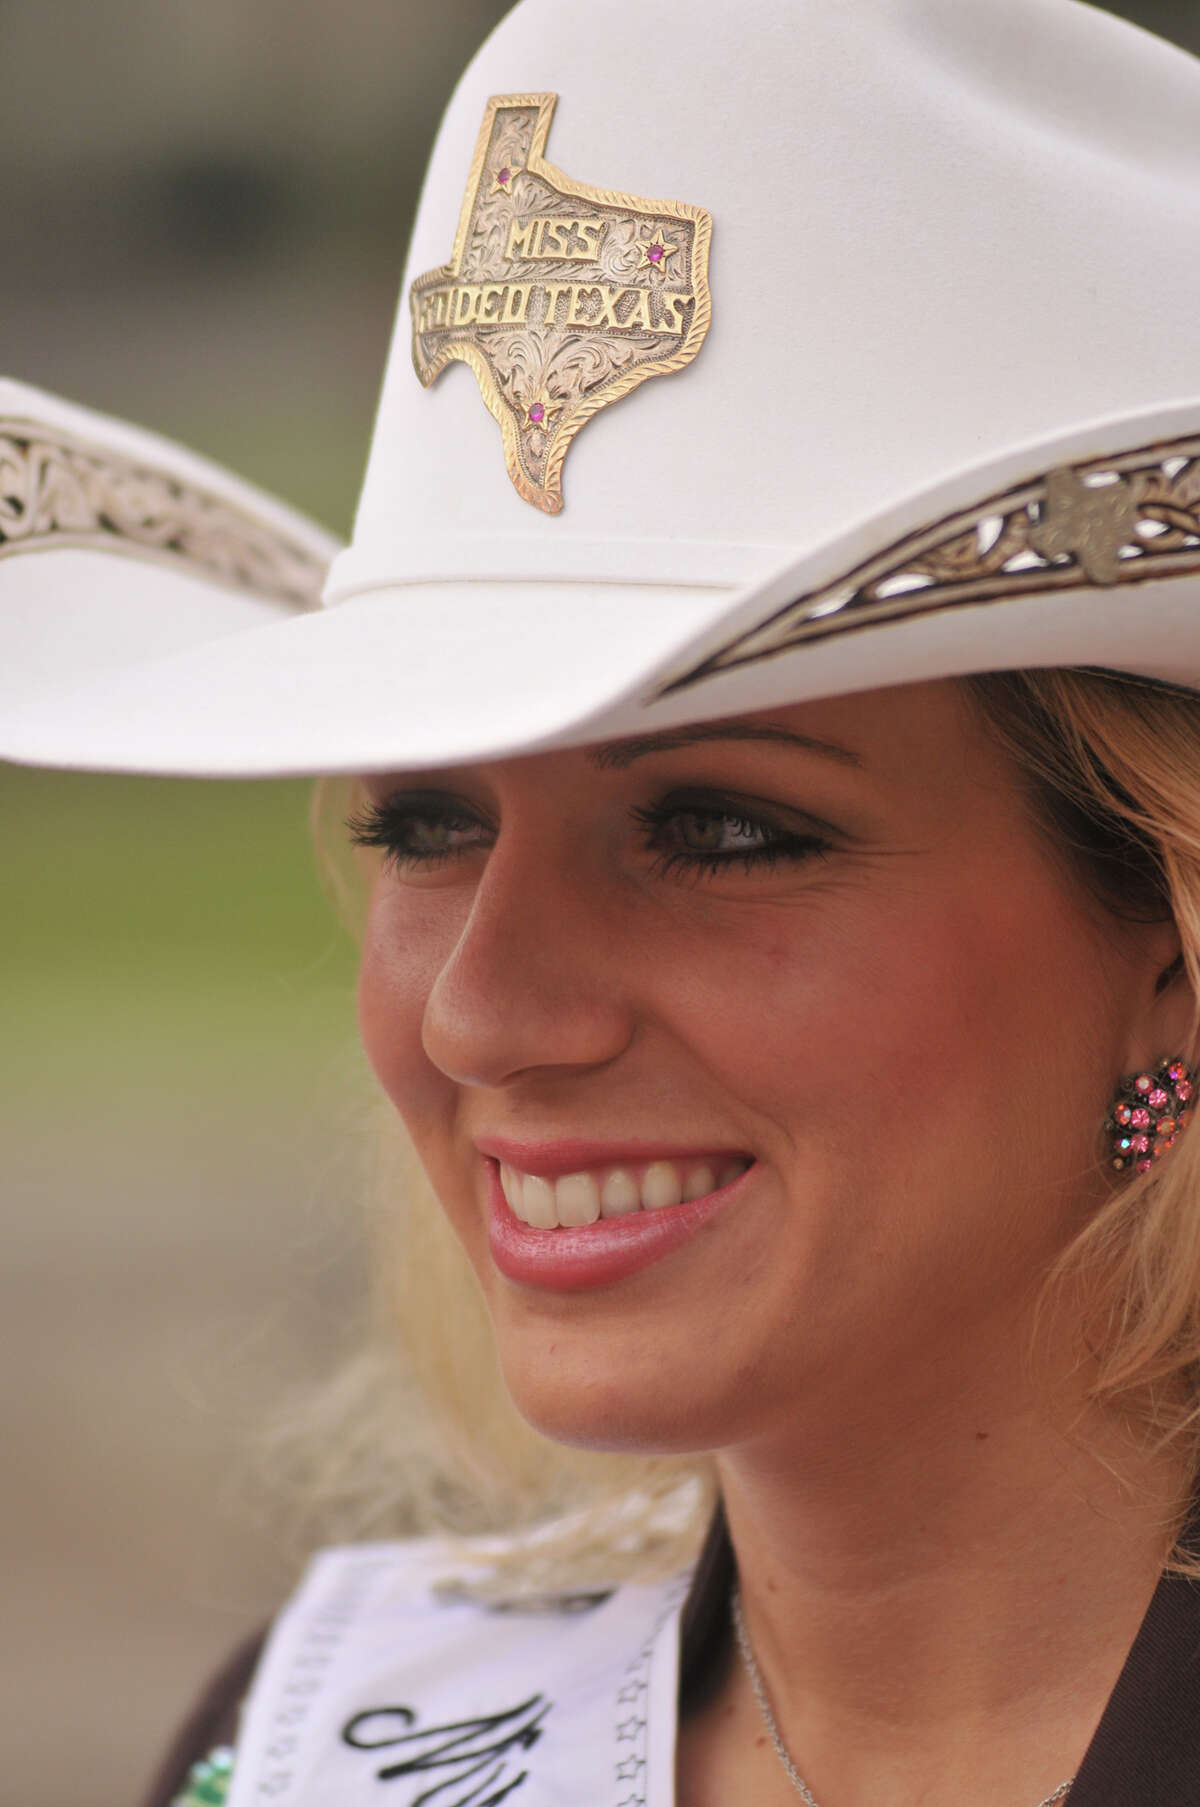 The Rodeo Queen The rhinestone cowgirl will be making her rounds, lassoing all the wild hearts.